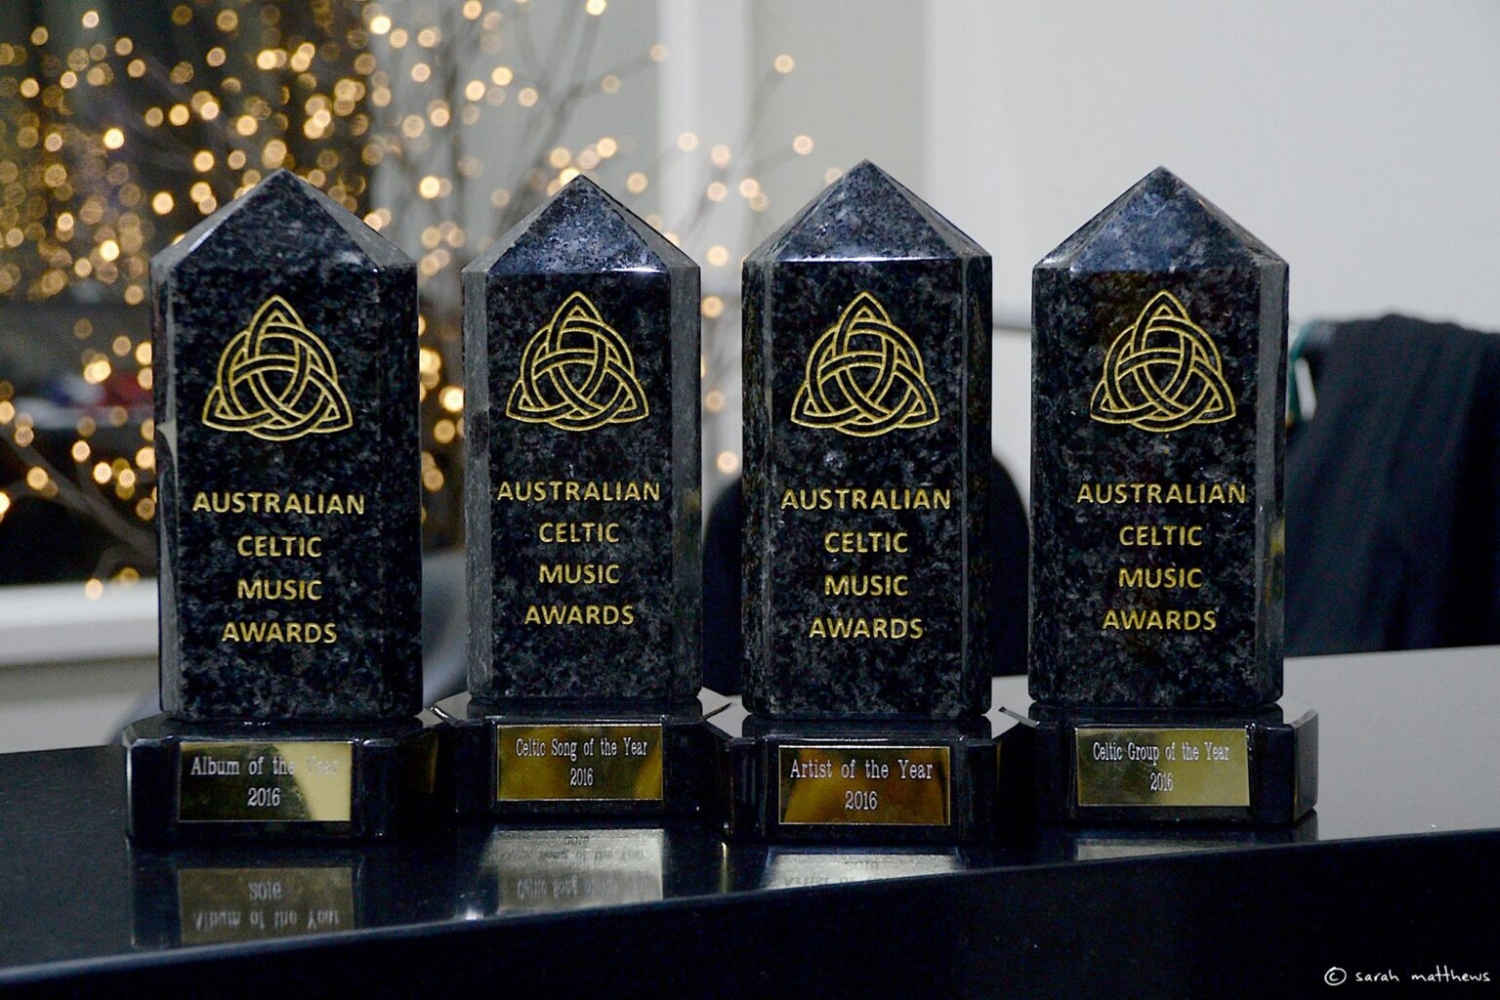 It was a very good year @ Australian Celtic Music Awards 2016